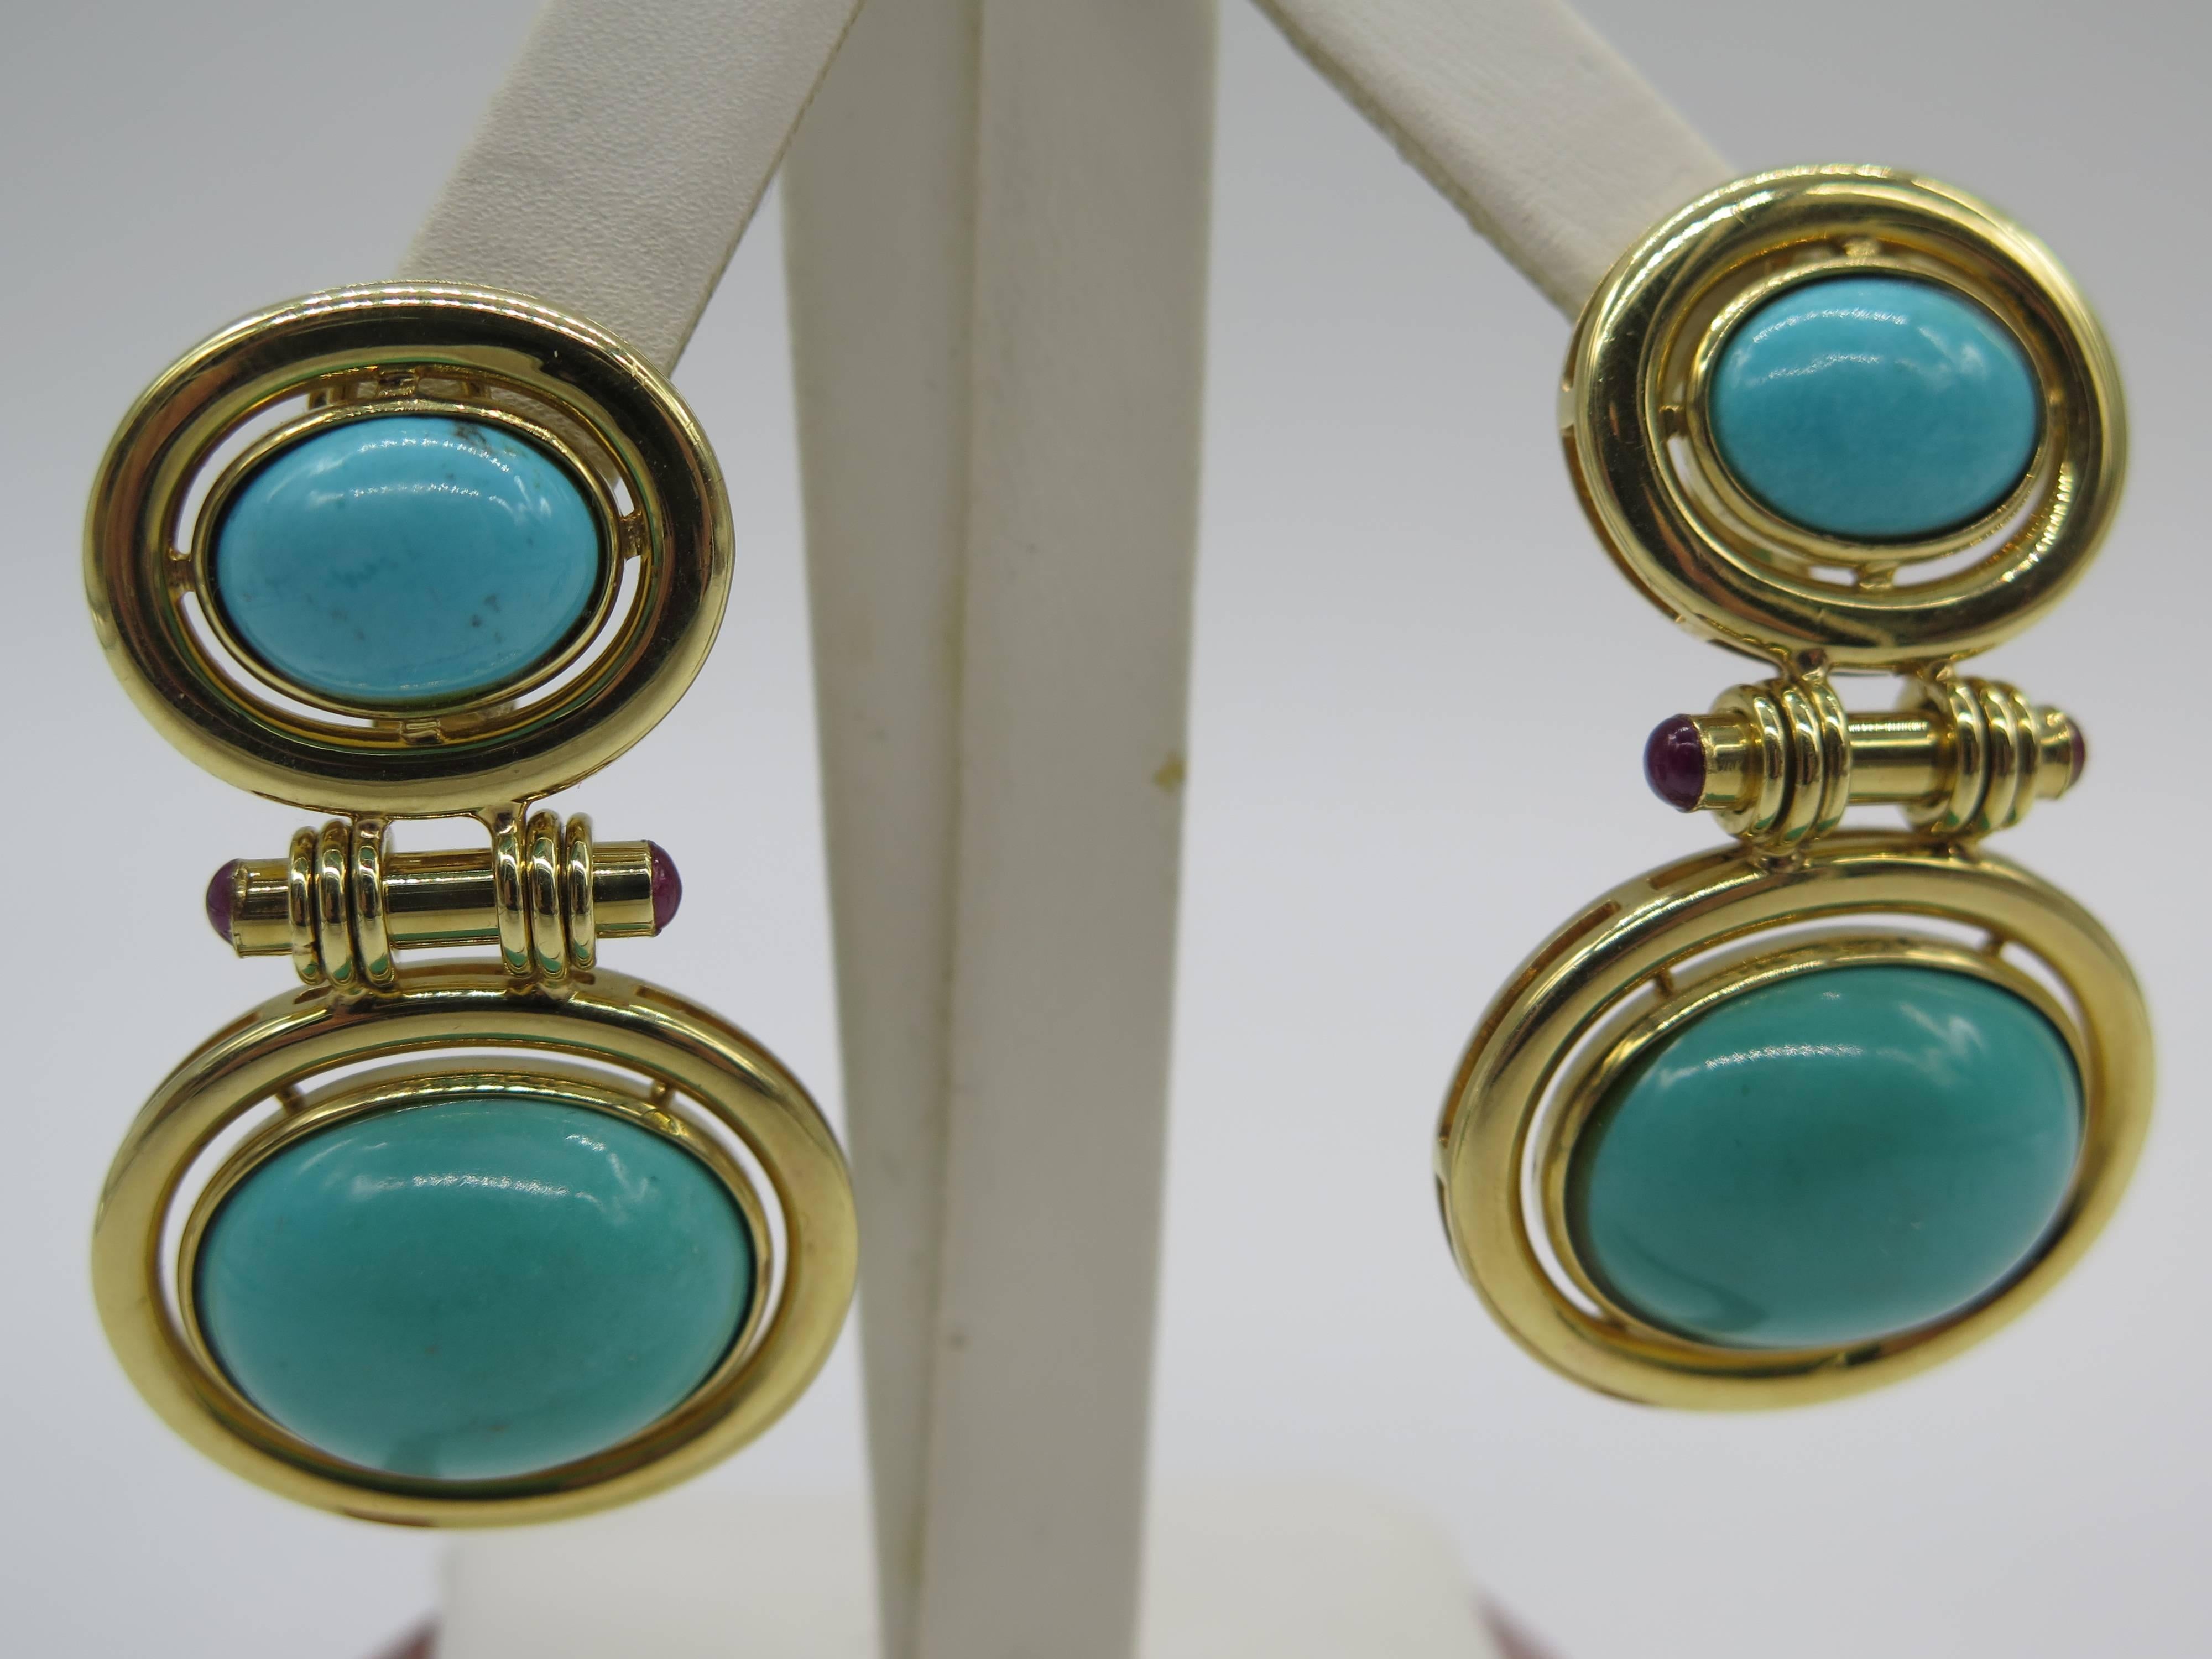 These amazing earrings feature four cabochon turquoise, and four cabochon ruby's, set in 18k yellow gold. Earrings measure approx.1 3/4-inches in length and 1 inch wide.Total weight is 34.0 grams. 